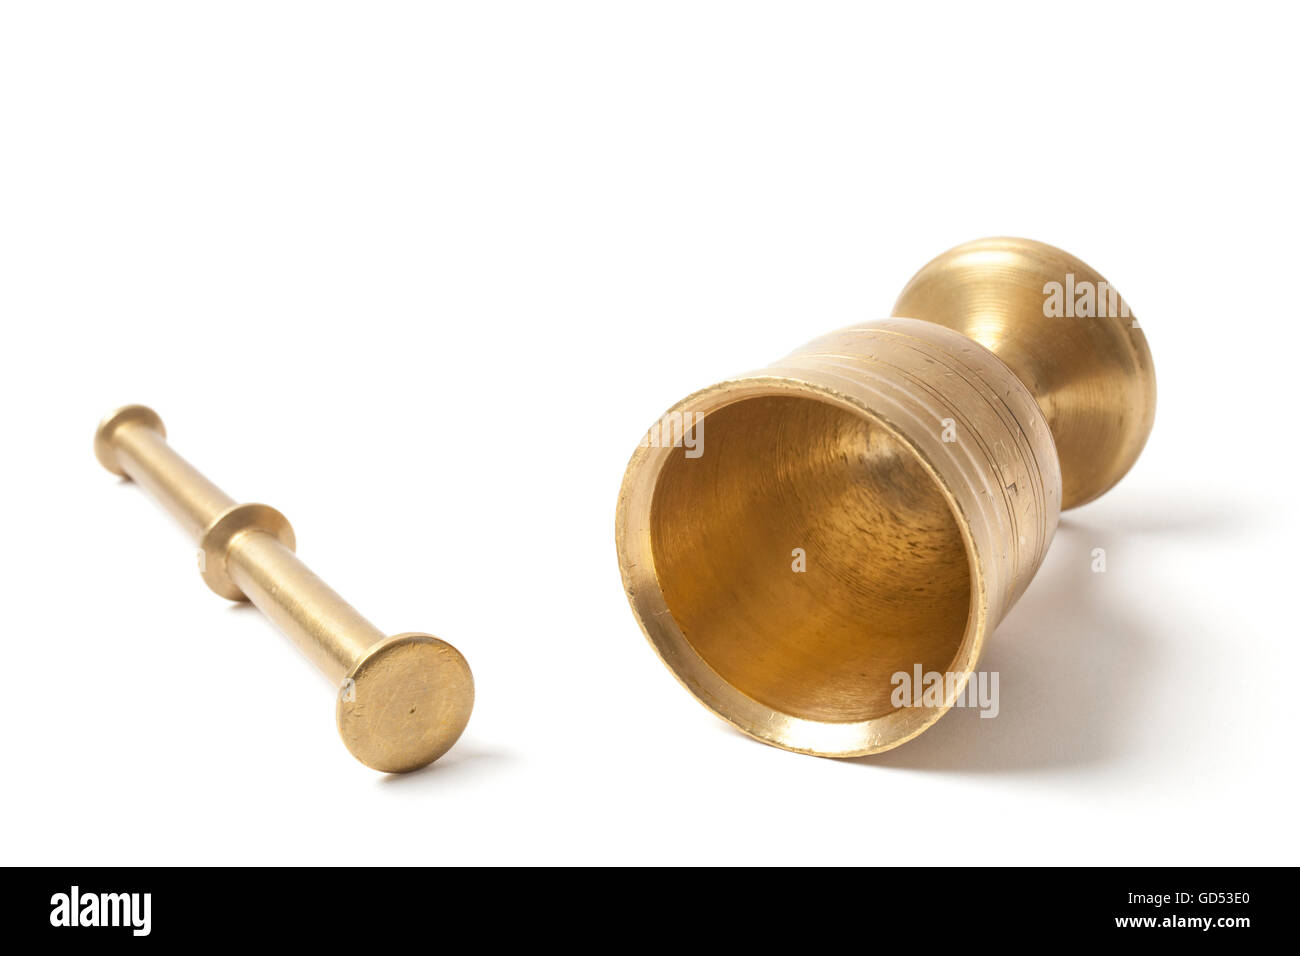 Stock image of a little brass mortar isolated on white background. Stock Photo